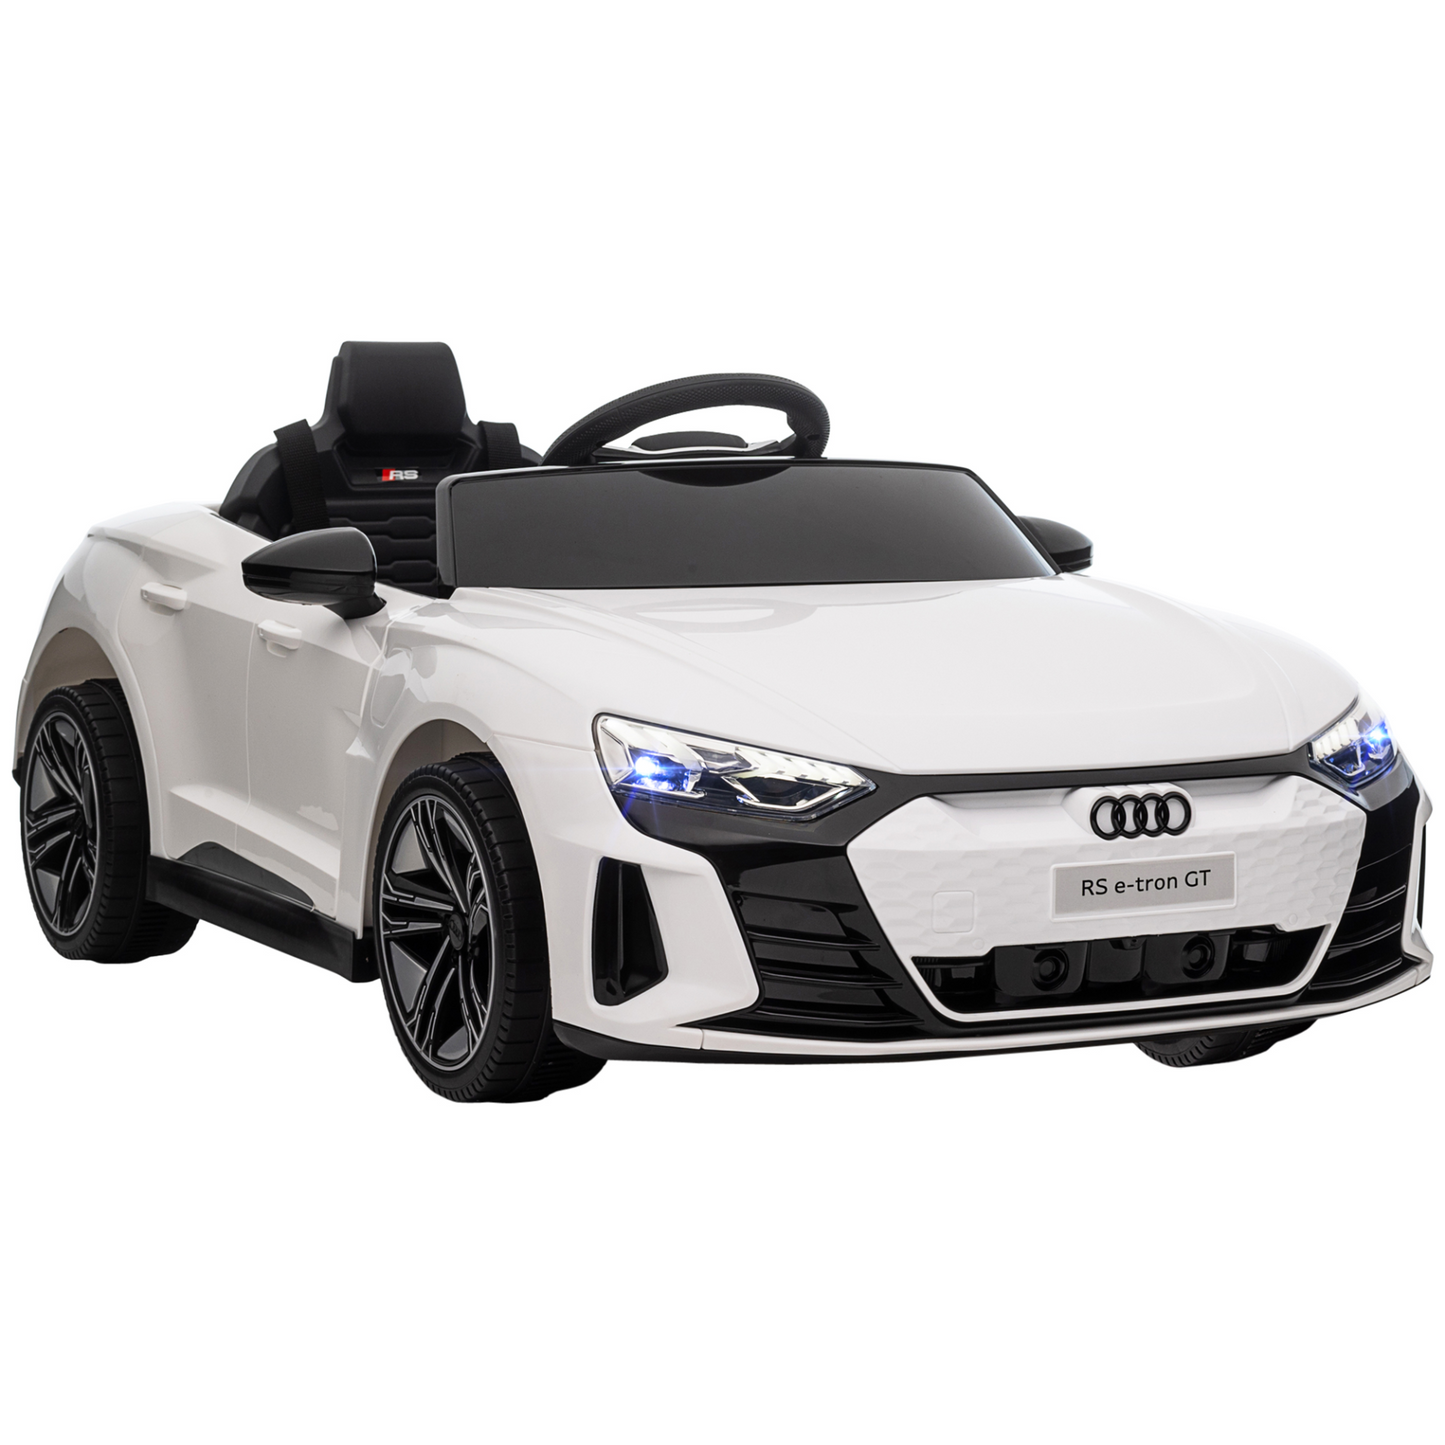 HOMCOM Audi RS e-tron GT Licensed Kids Electric Ride-On Car 12V Battery Powered Toy w/ Remote Control, Lights, Music, for 3-5 years, White